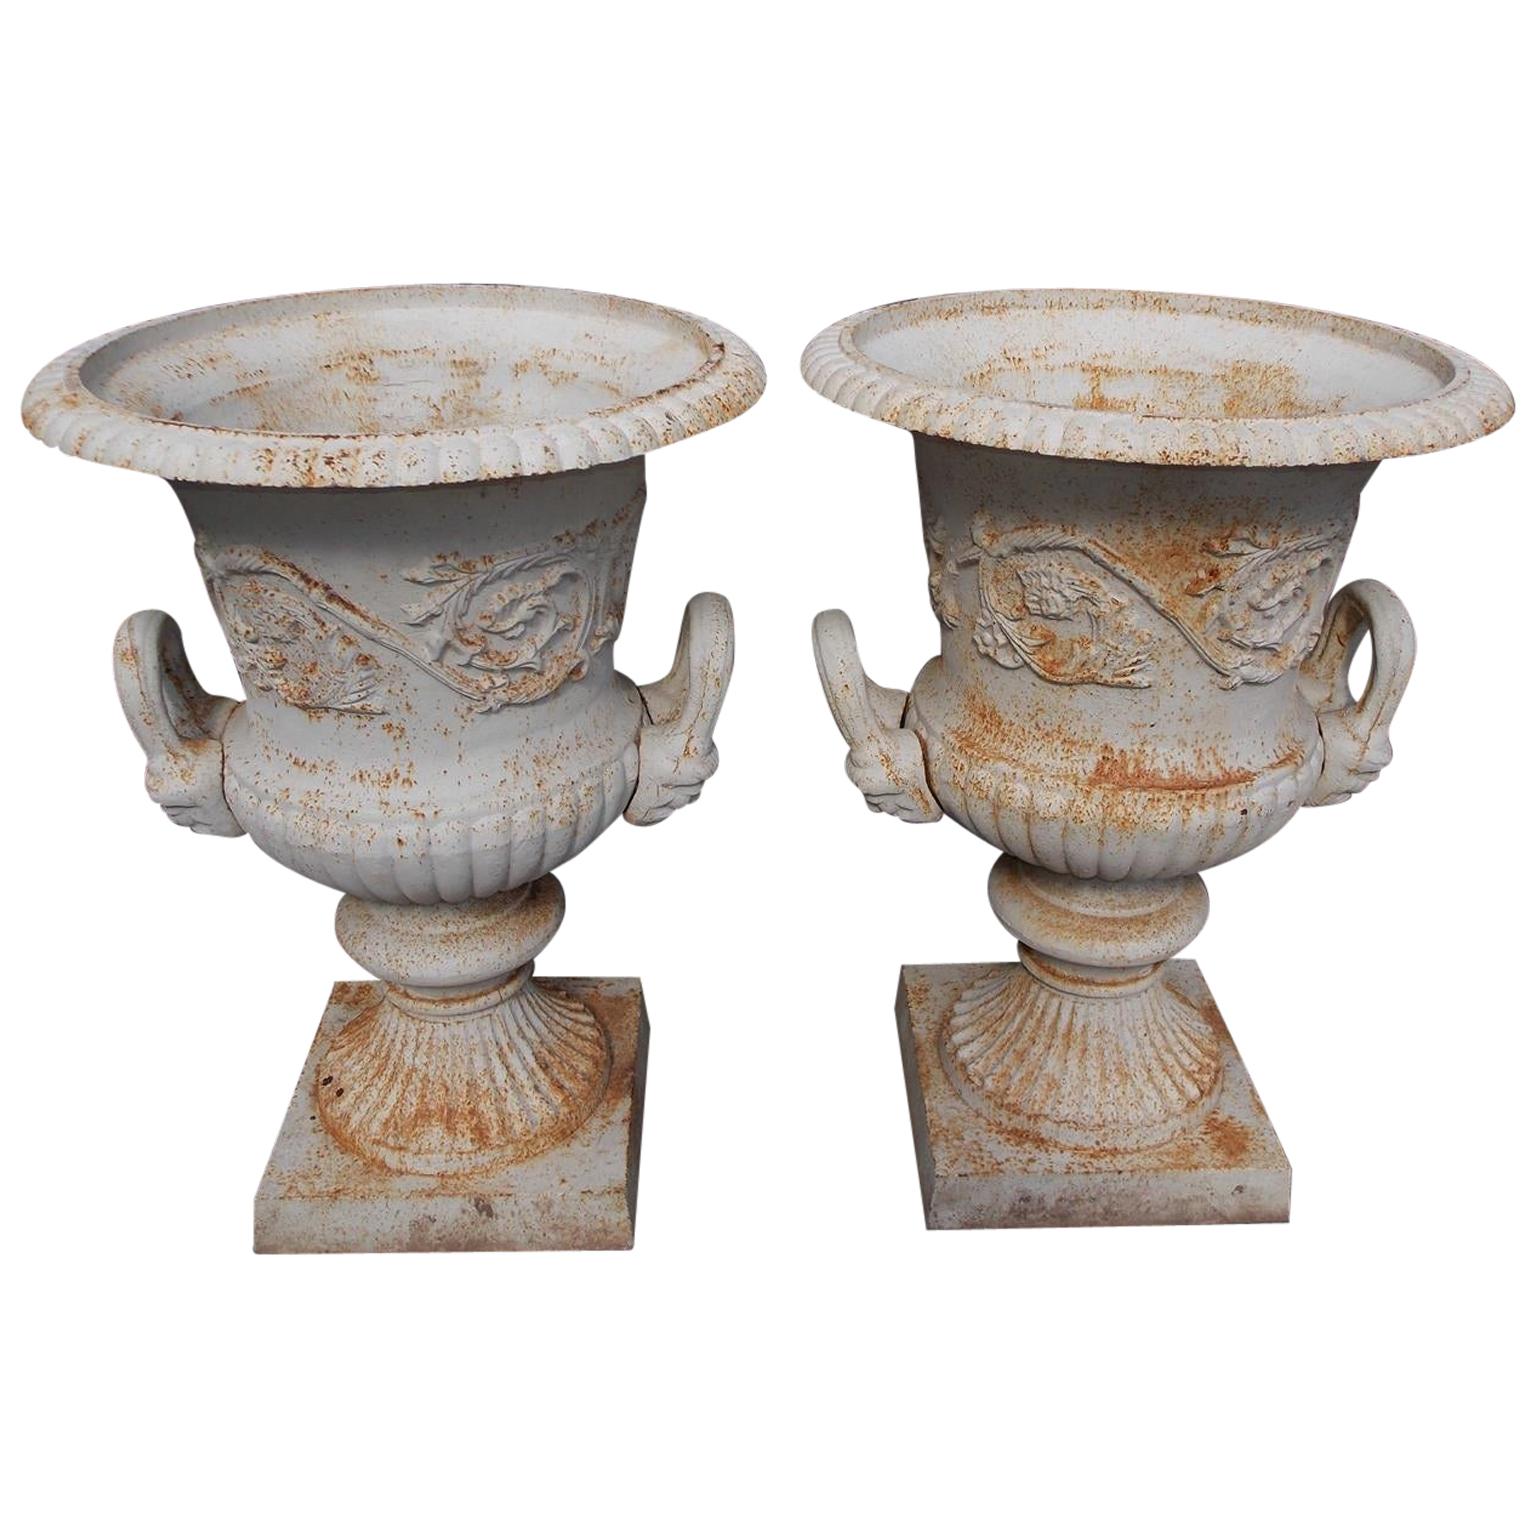 Pair of English Monumental Cast Iron and Painted Campana-Form Urns, Circa 1850